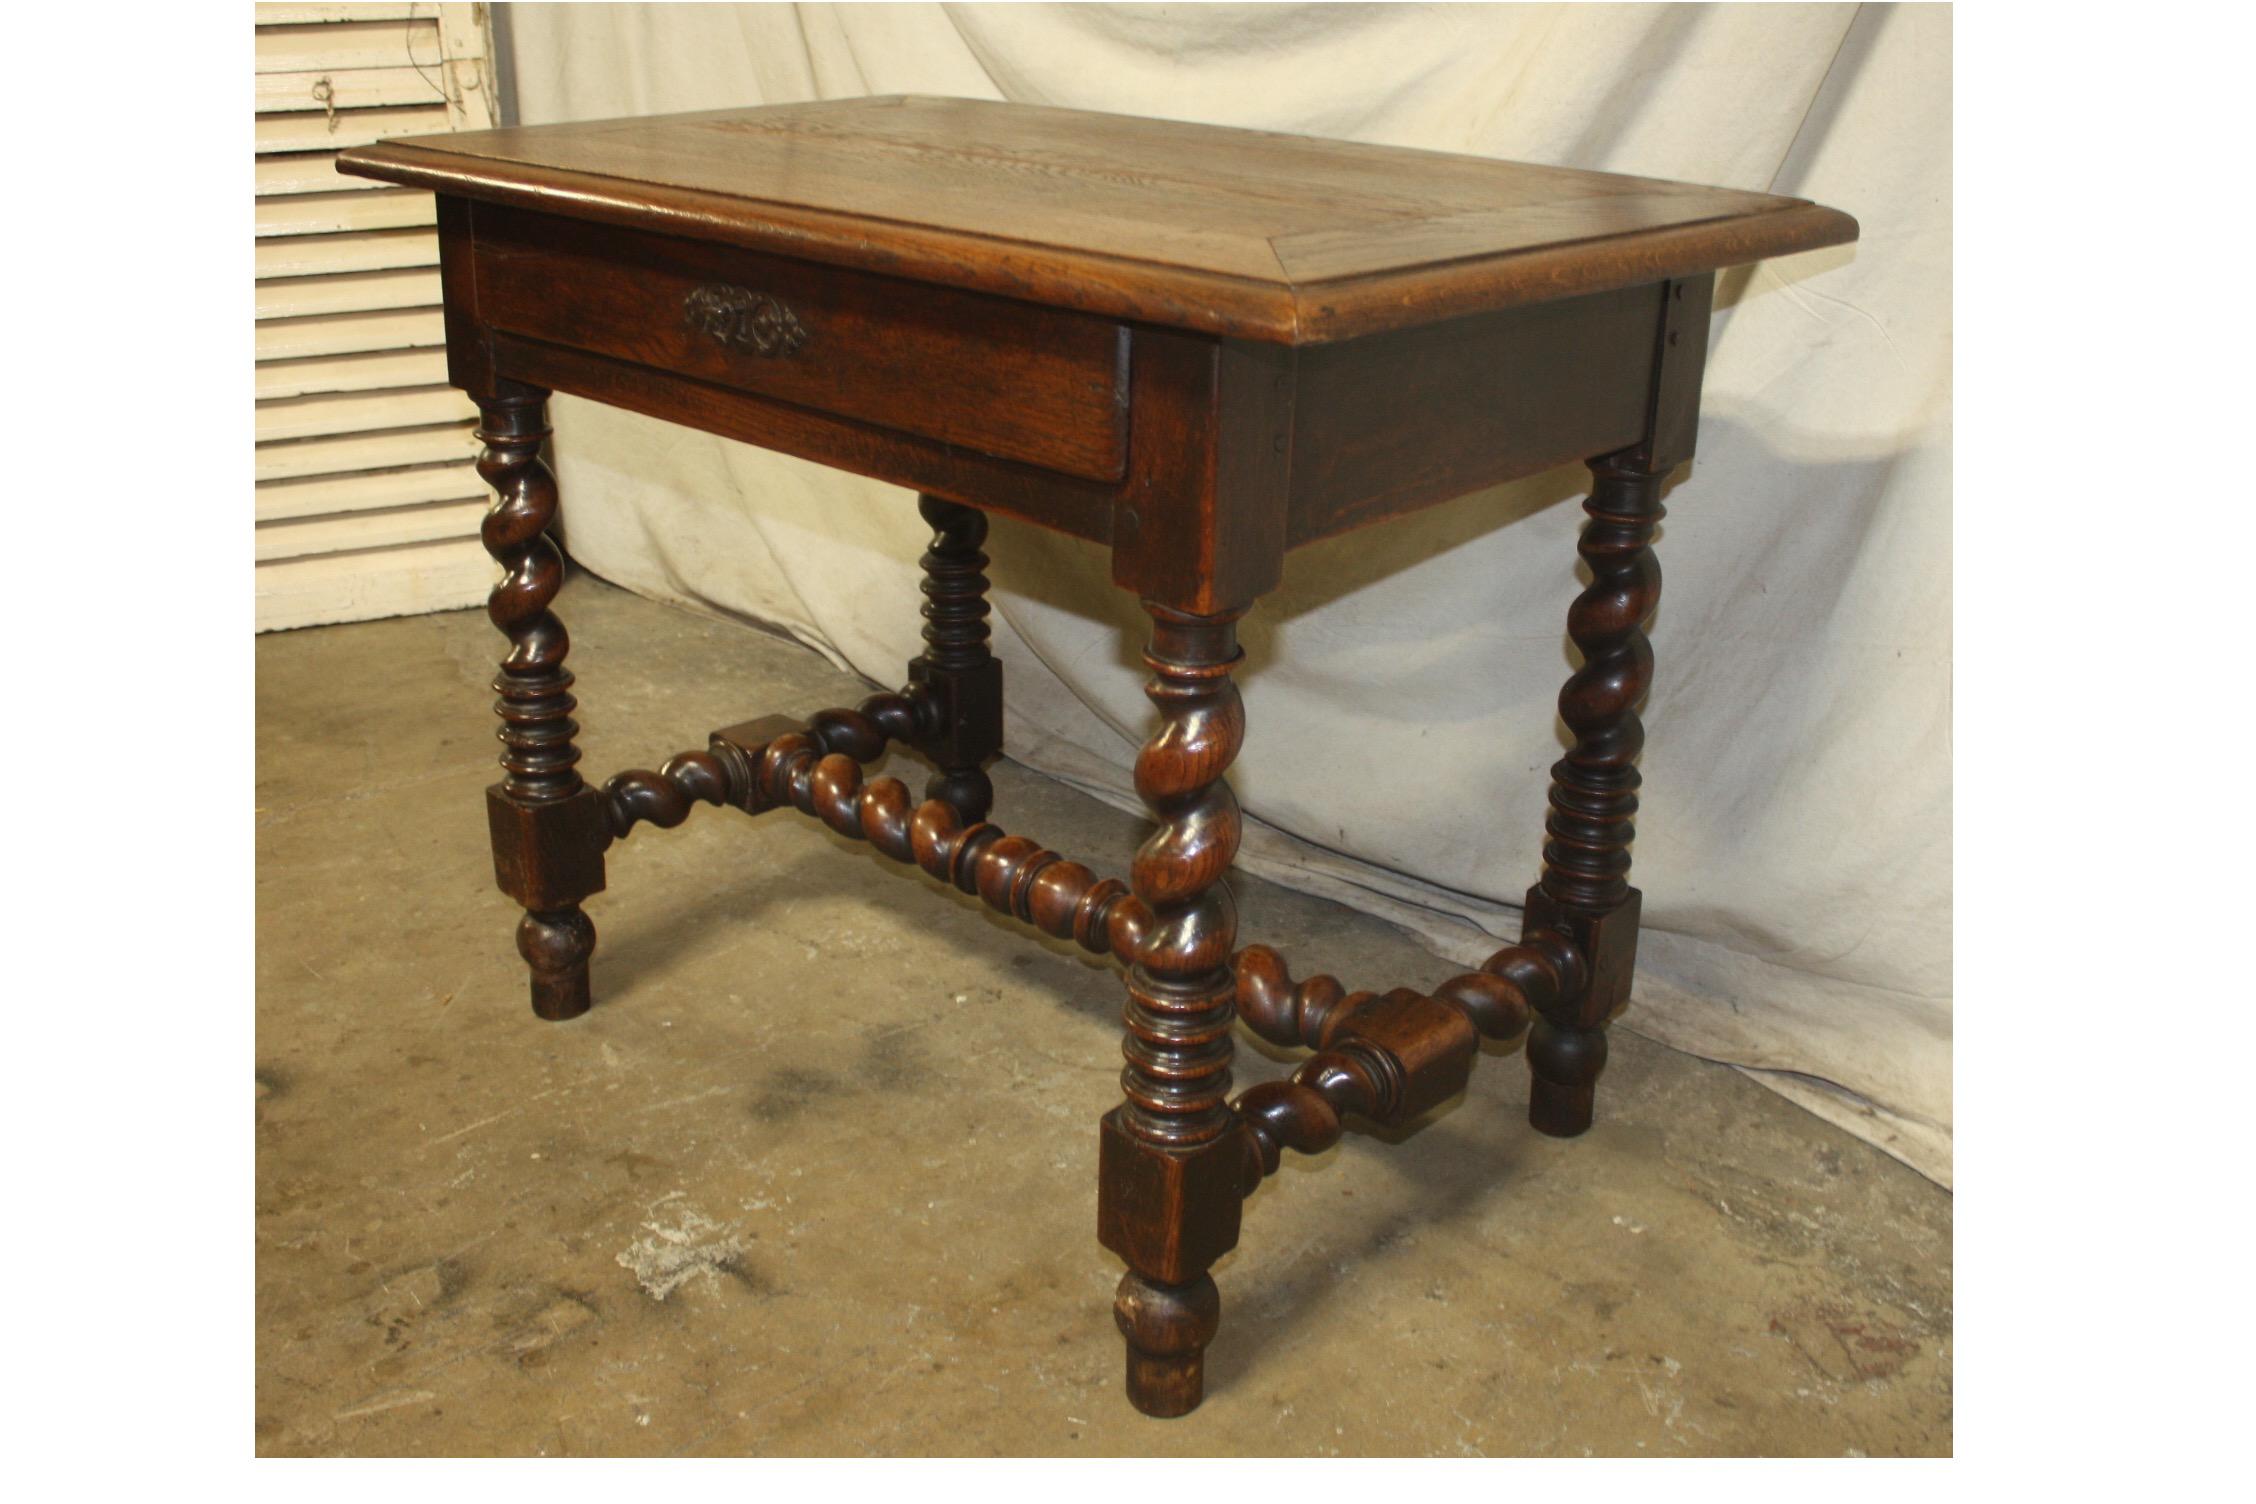 Early 18th century French writing table.